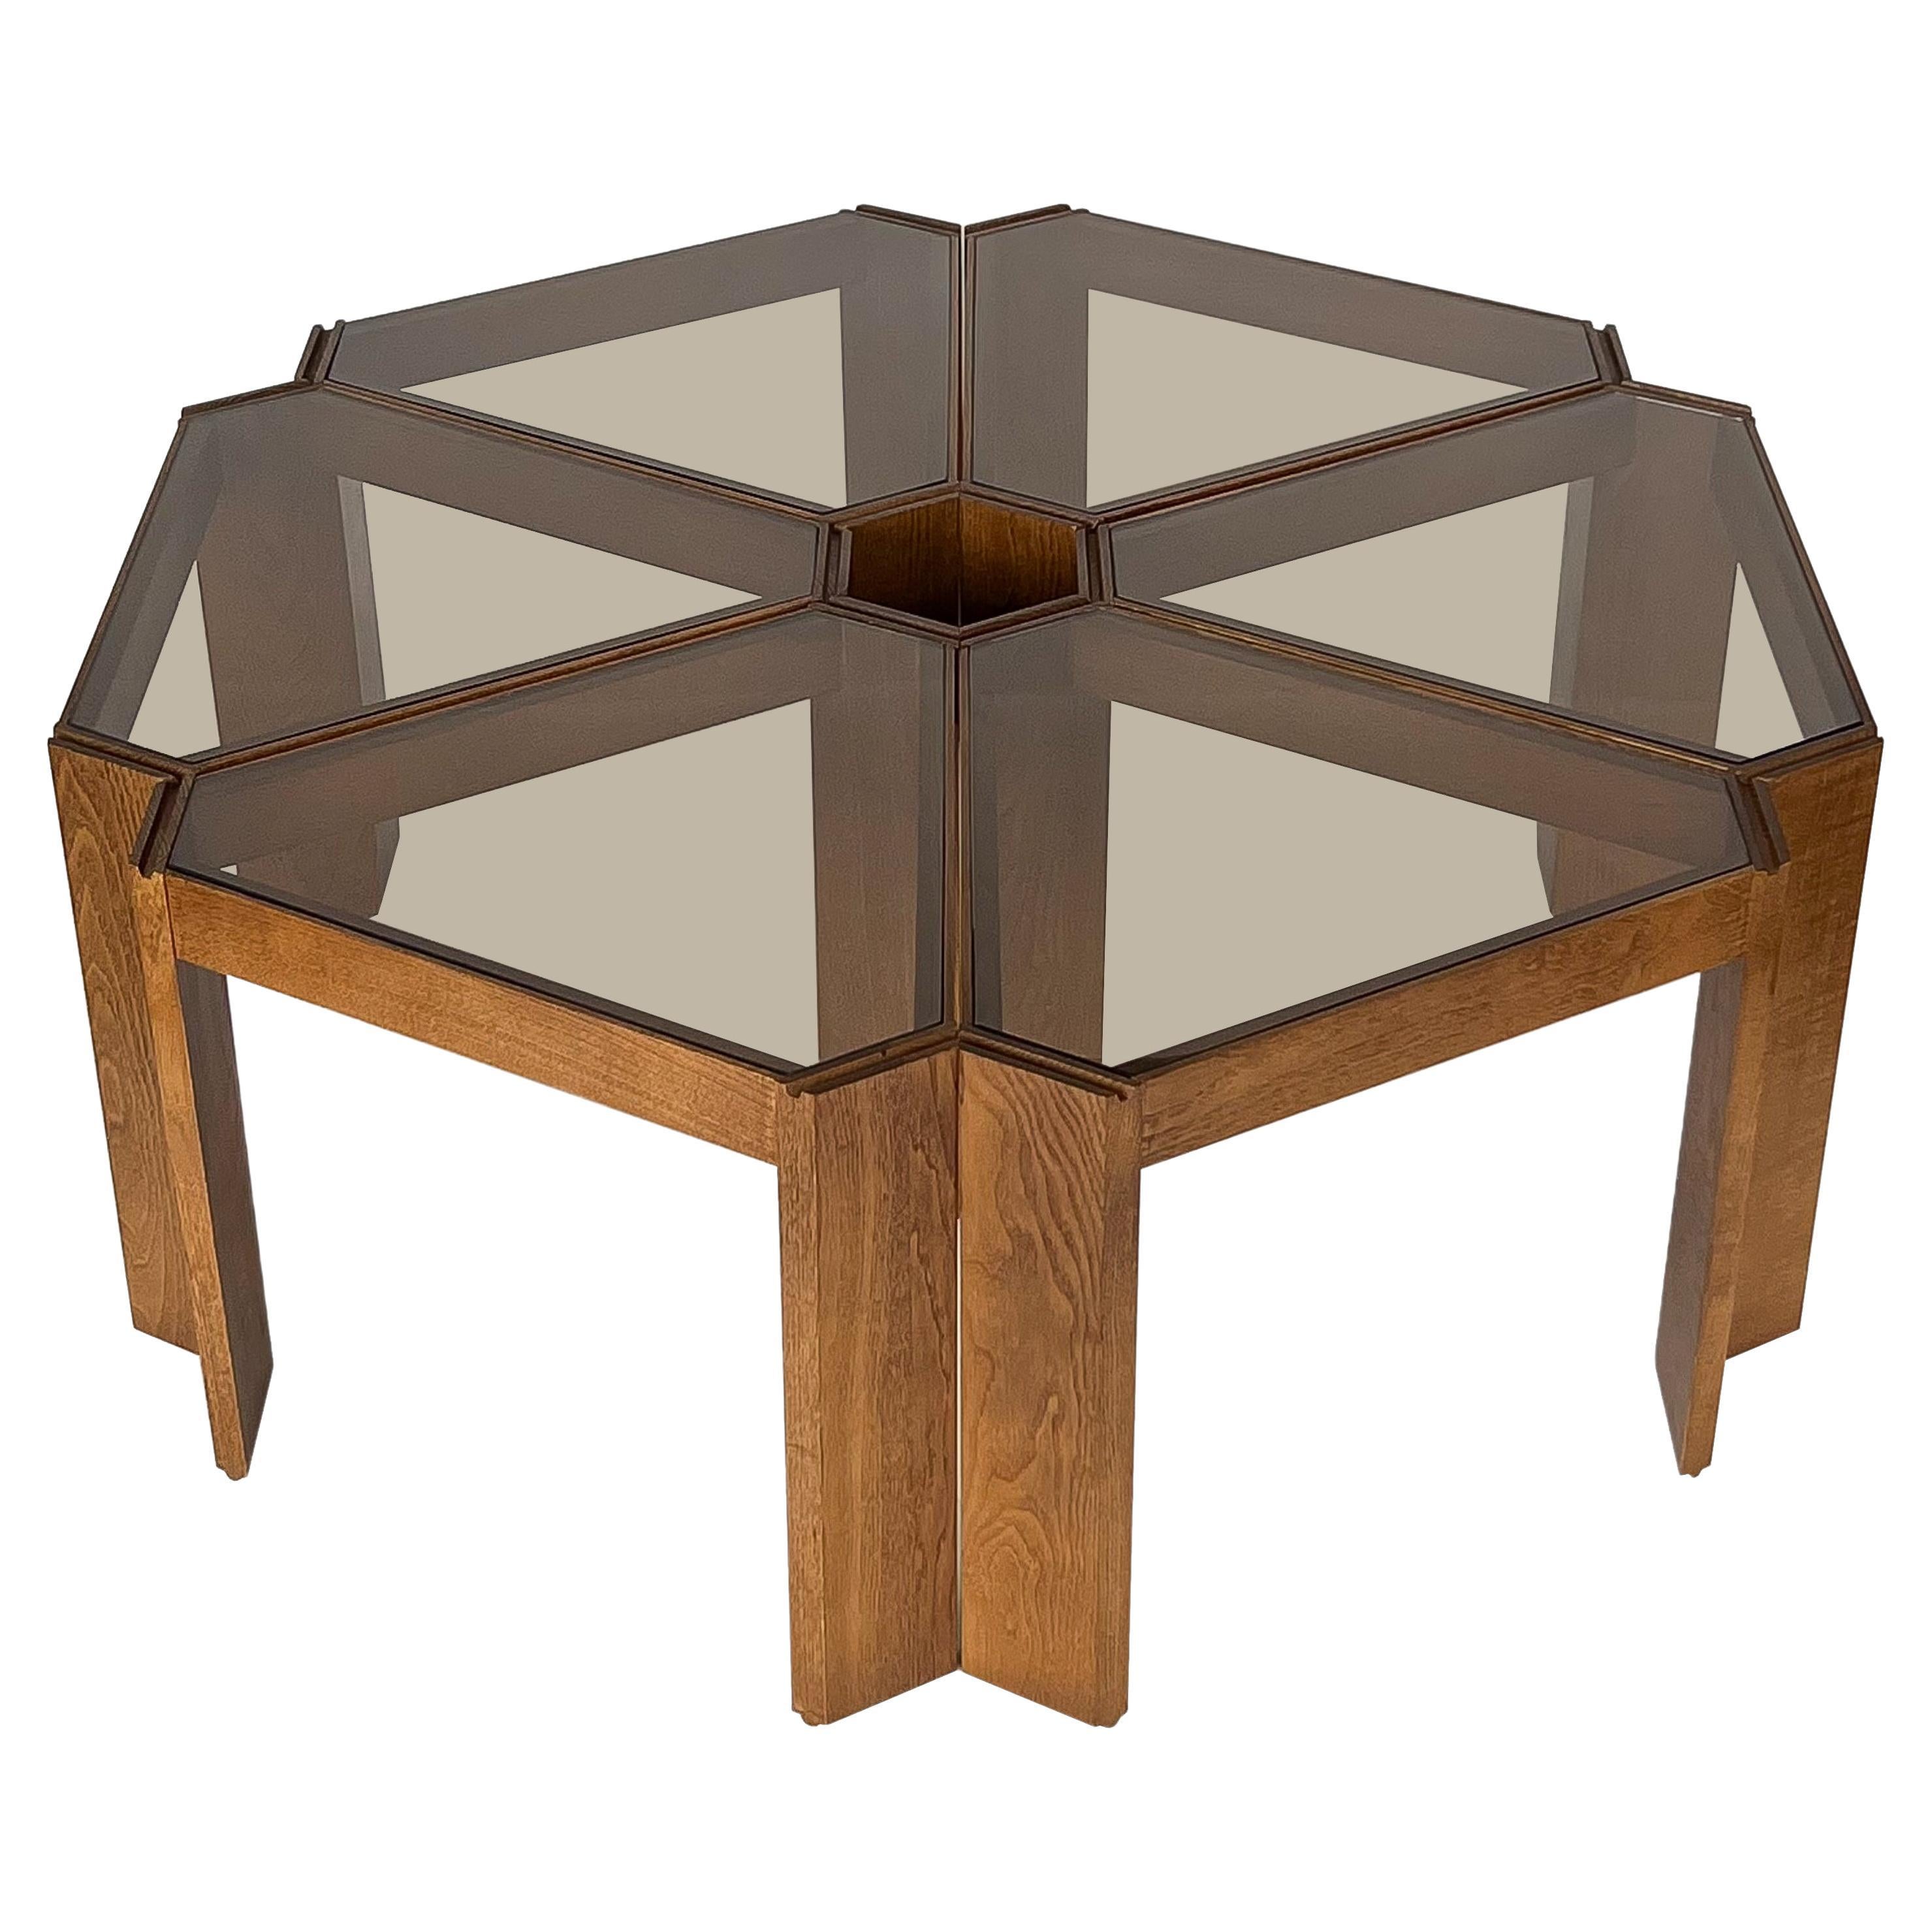 Set of 6 Bunching Modular Coffee Tables in the Style of Frattini